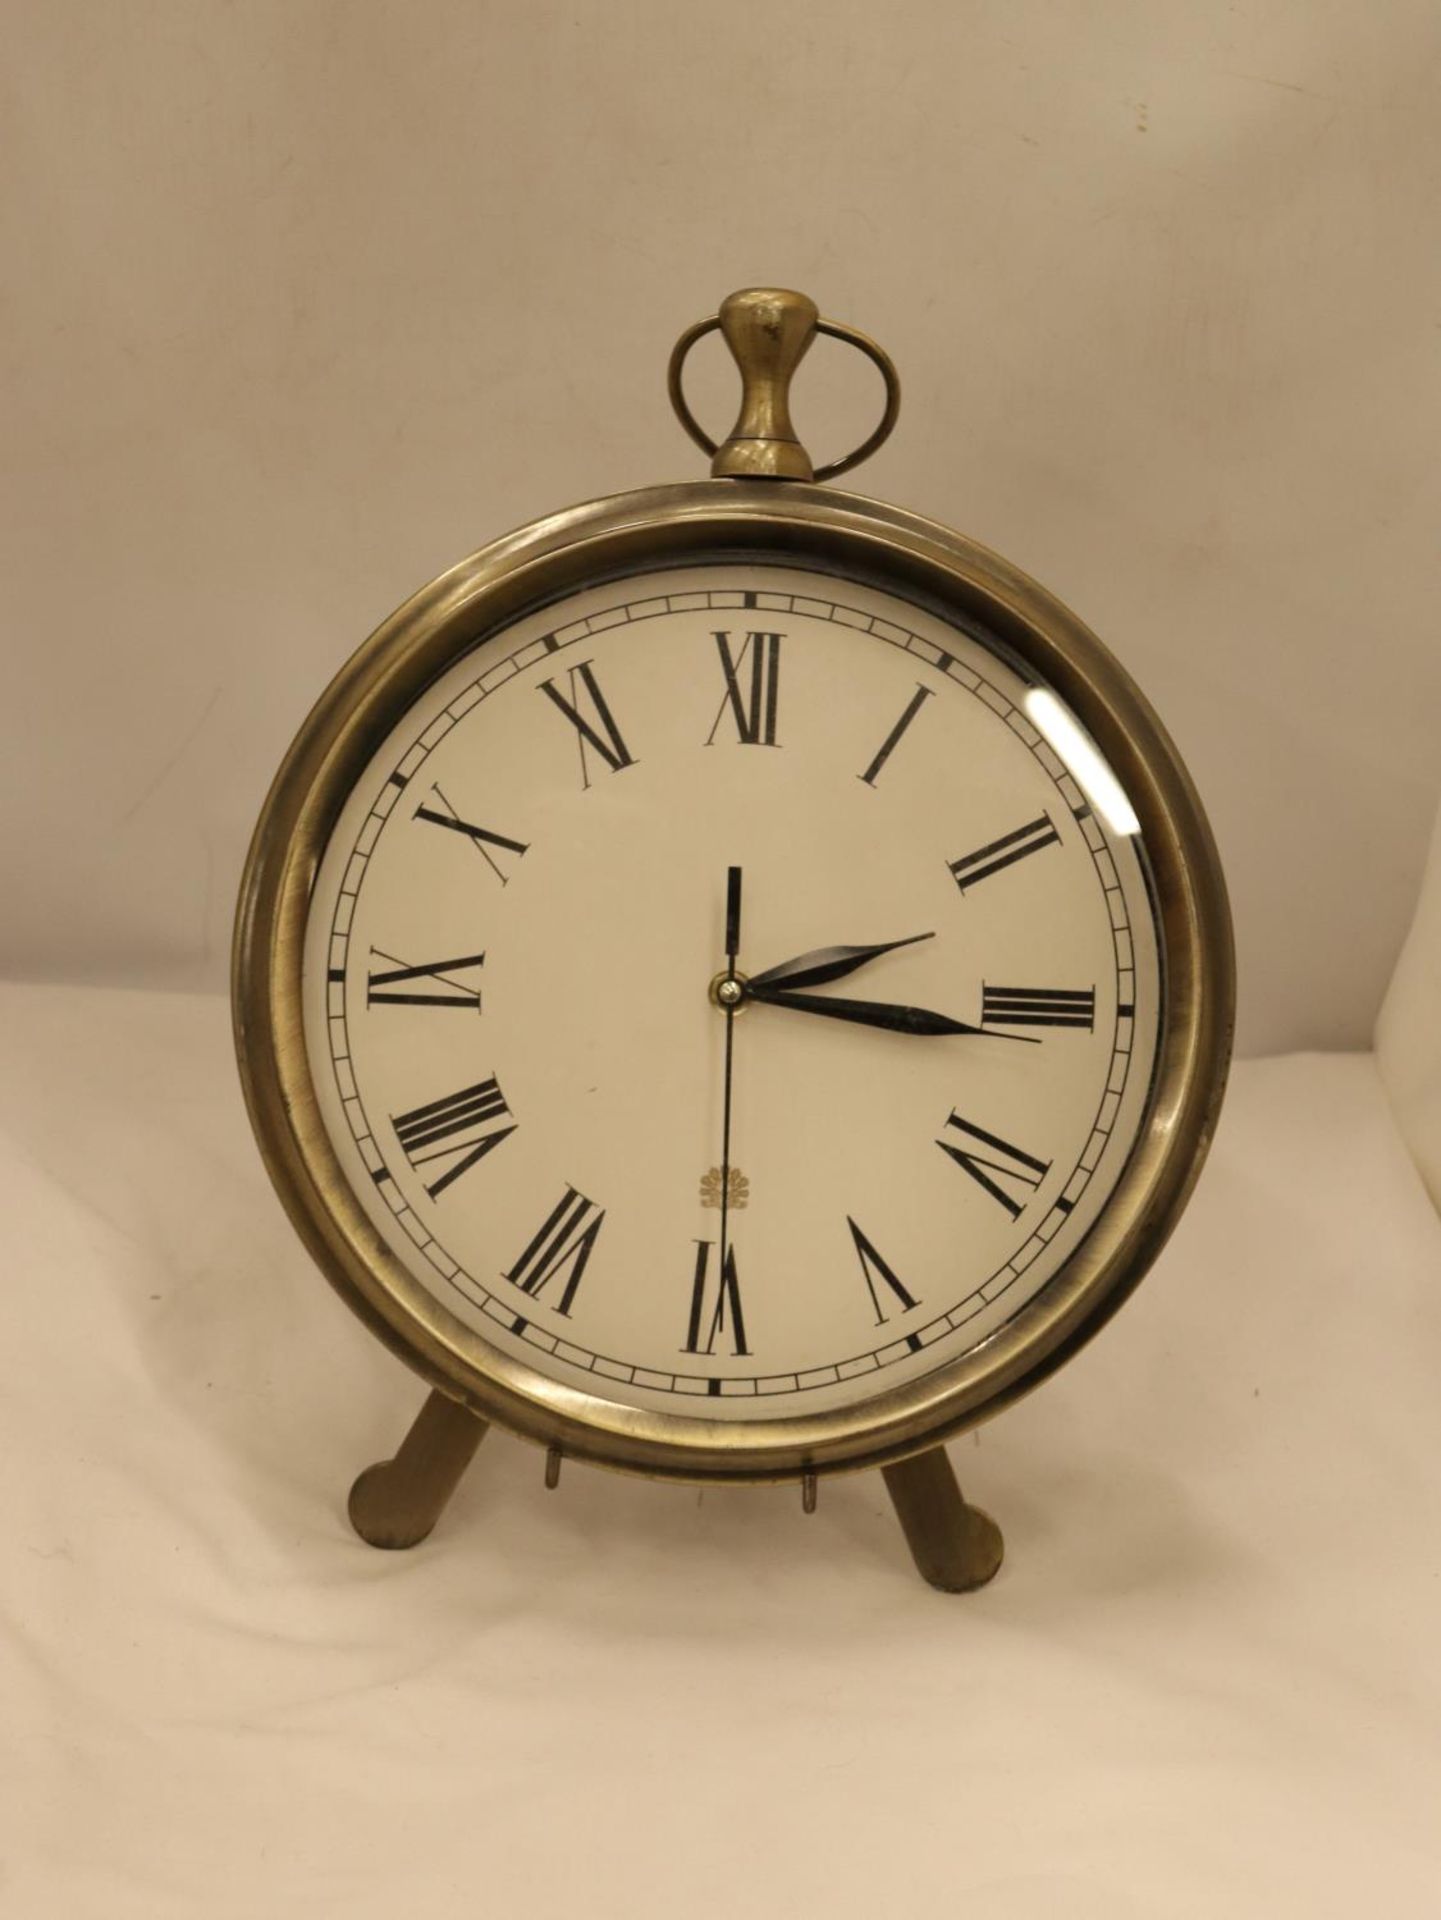 A LARGE POCKET WATCH CLOCK ON A STAND, HEIGHT 36CM